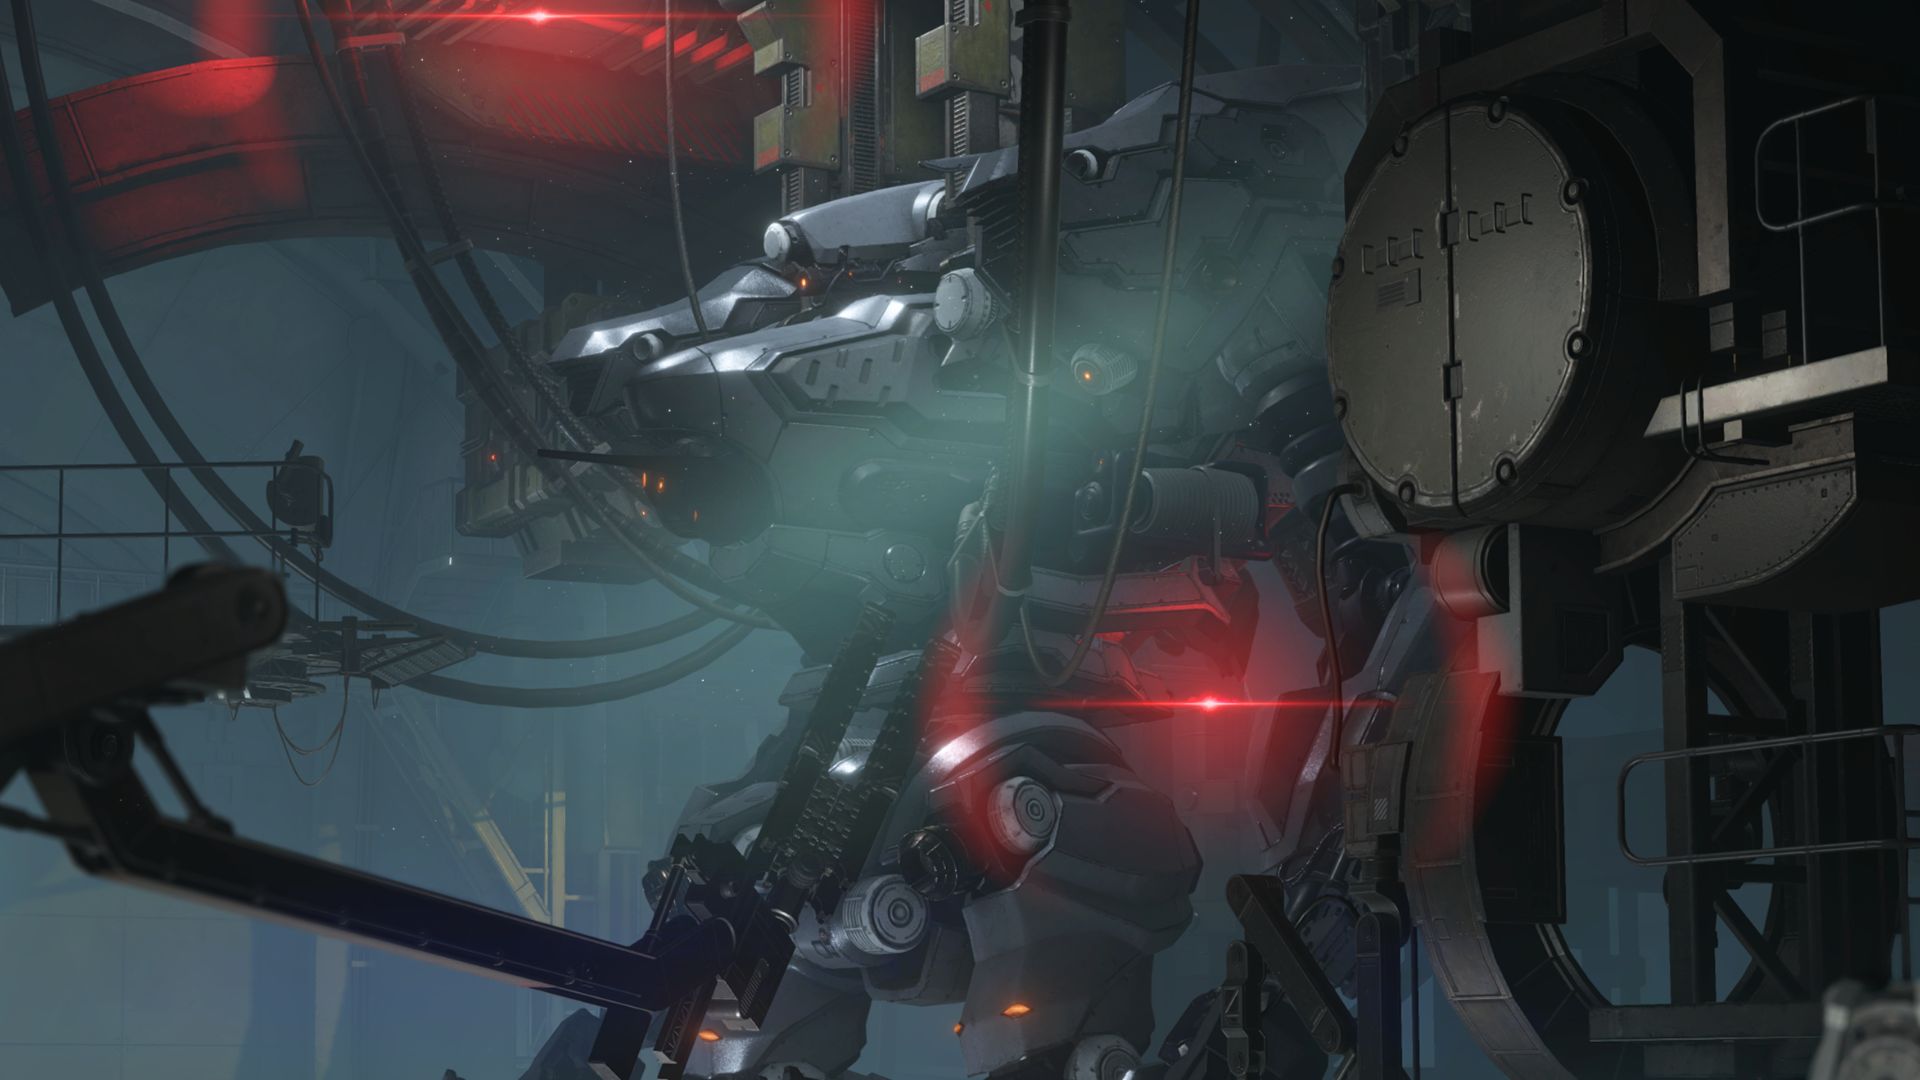 Armored Core 6's multiplayer has a feature Elden Ring sorely needs